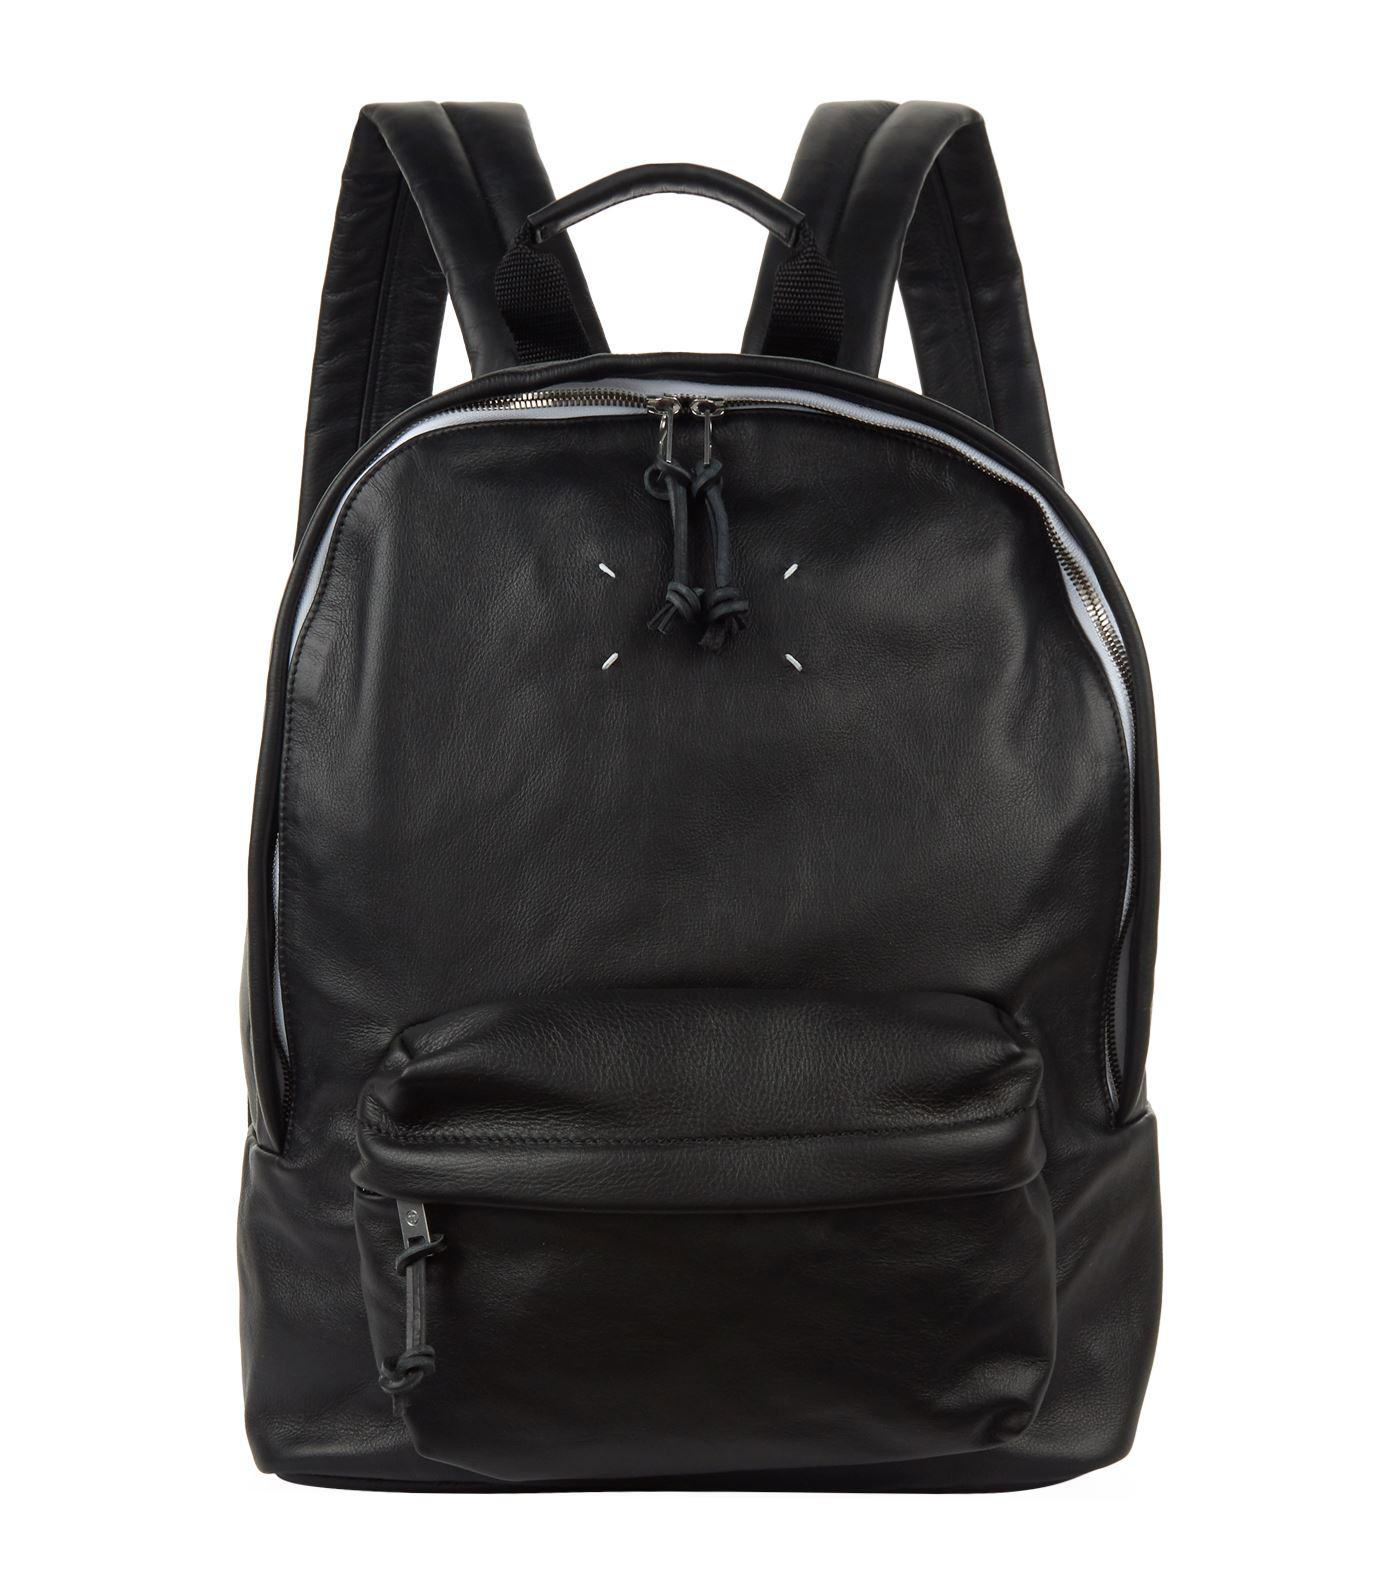 Maison Margiela Leather Four Stitch Backpack in Black for Men - Lyst